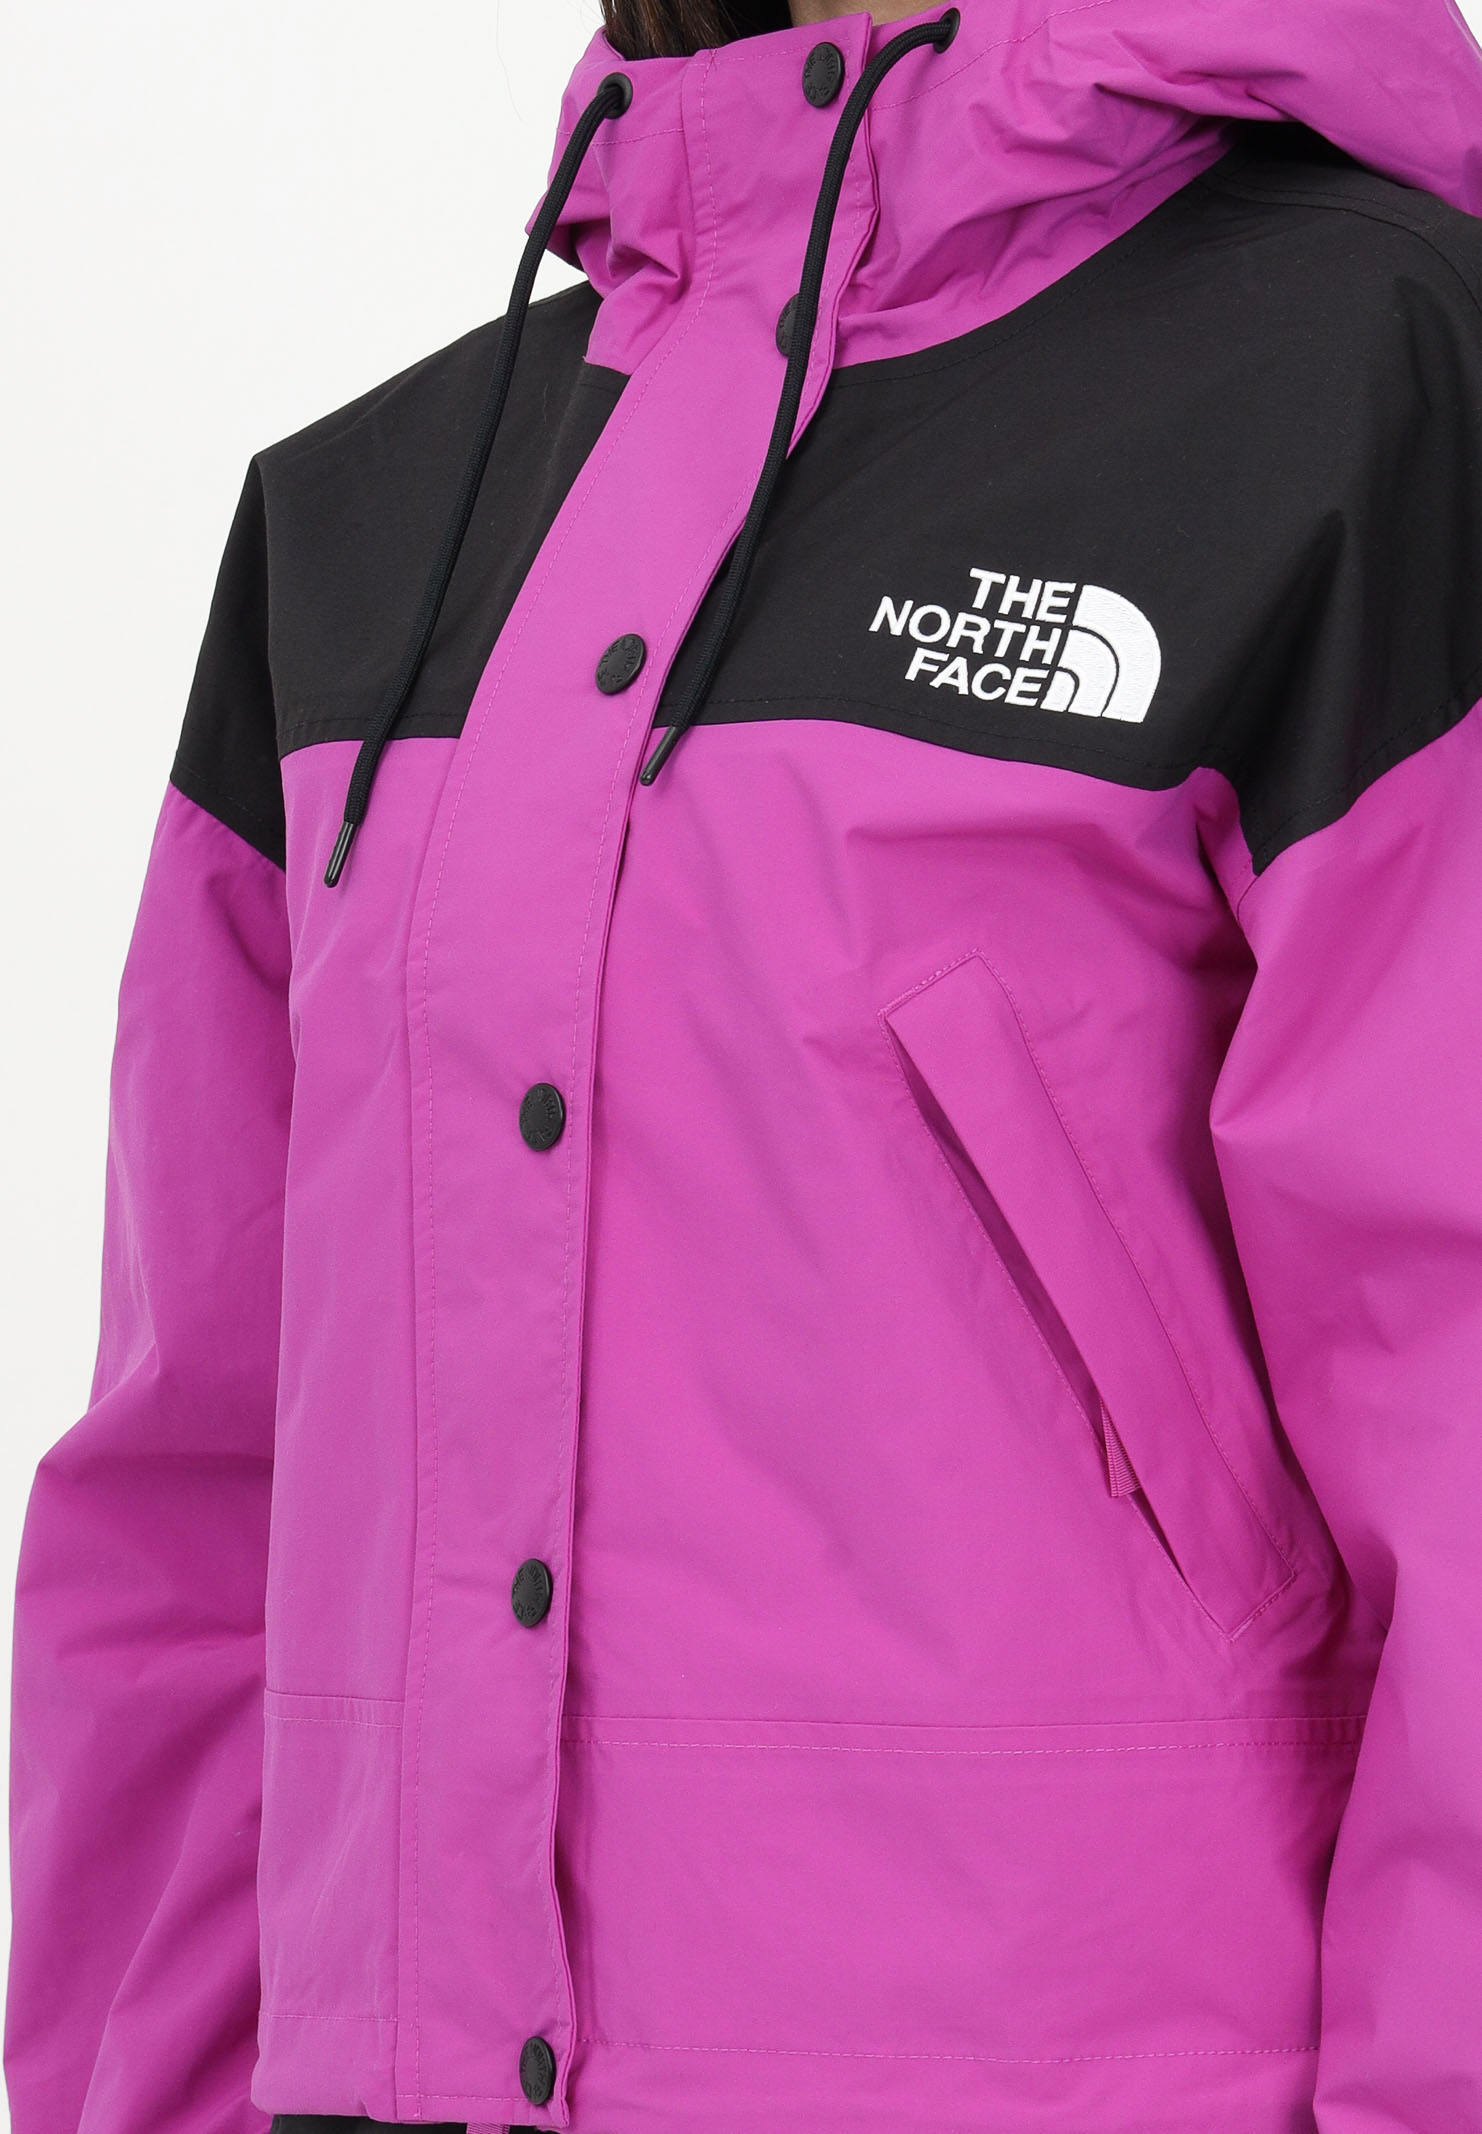 Purple women's windbreaker with logo THE NORTH FACE | NF0A3XDCLV11LV11